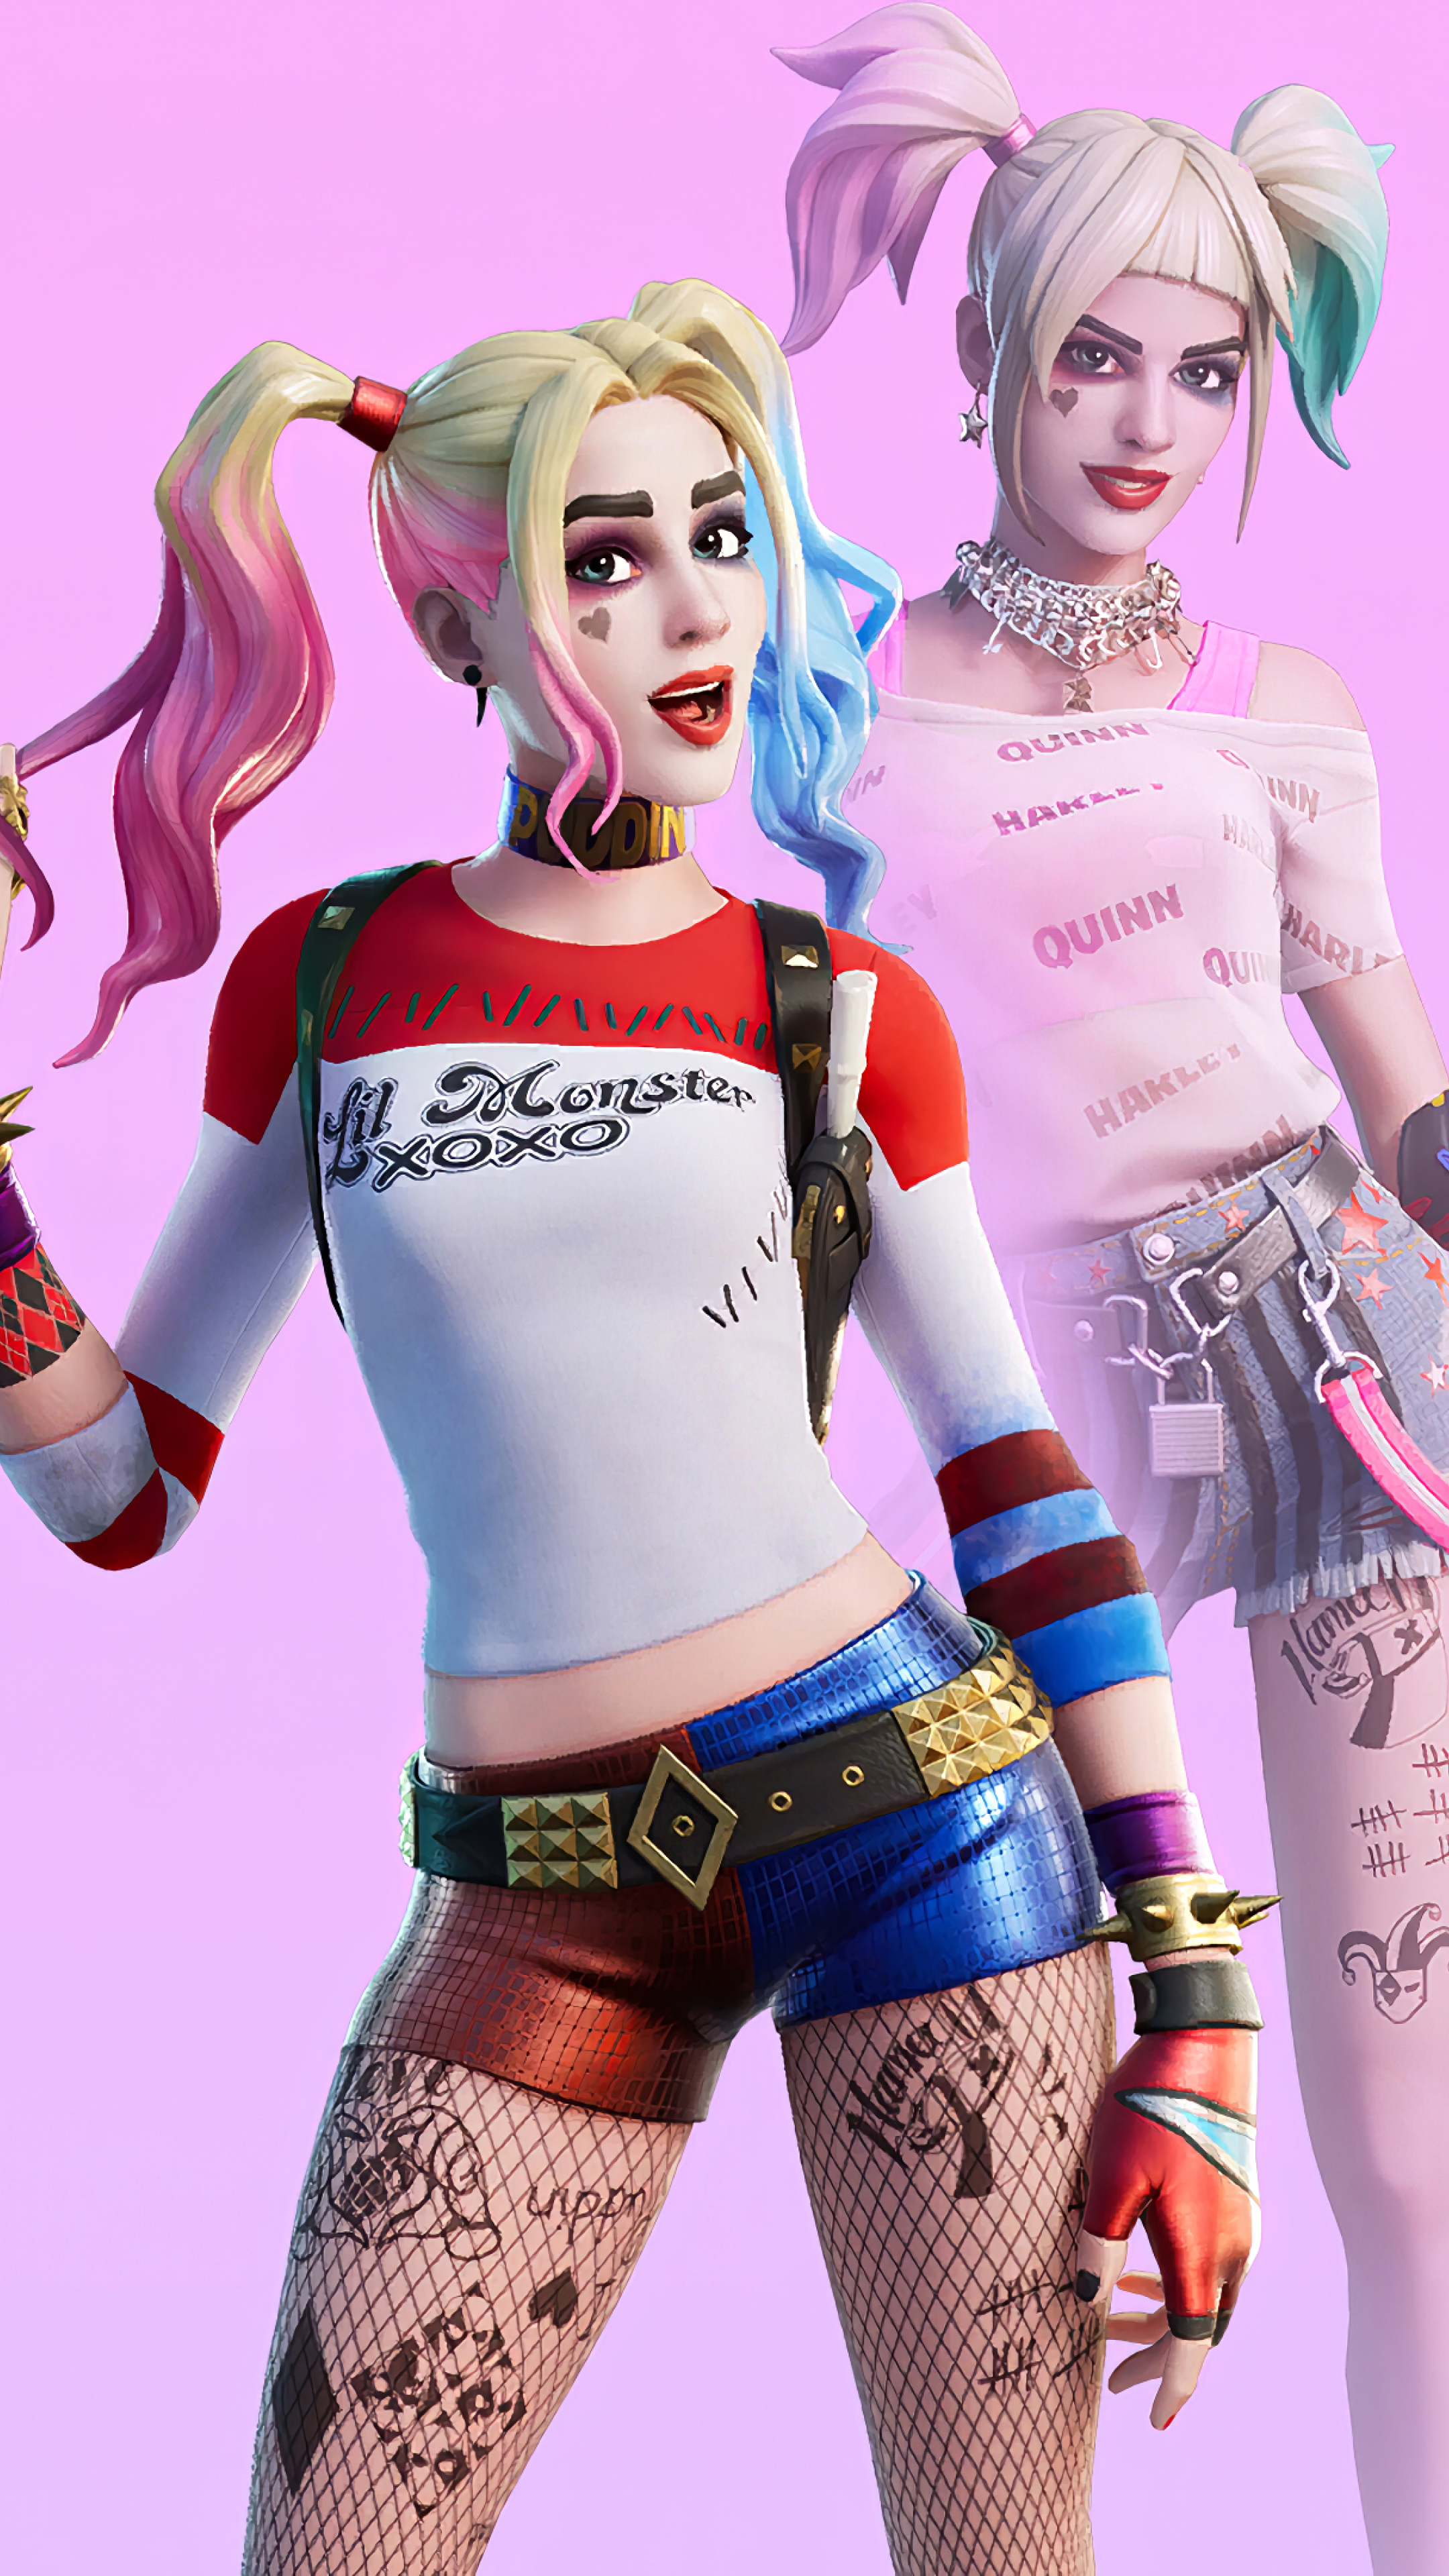 2160x3840 4k Harley Quinn Fortnite Skin Outfit Sony Xperia X Xz Z5 Premium Wallpaper Hd Games 4k Wallpapers Images Photos And Background Wallpapers Den